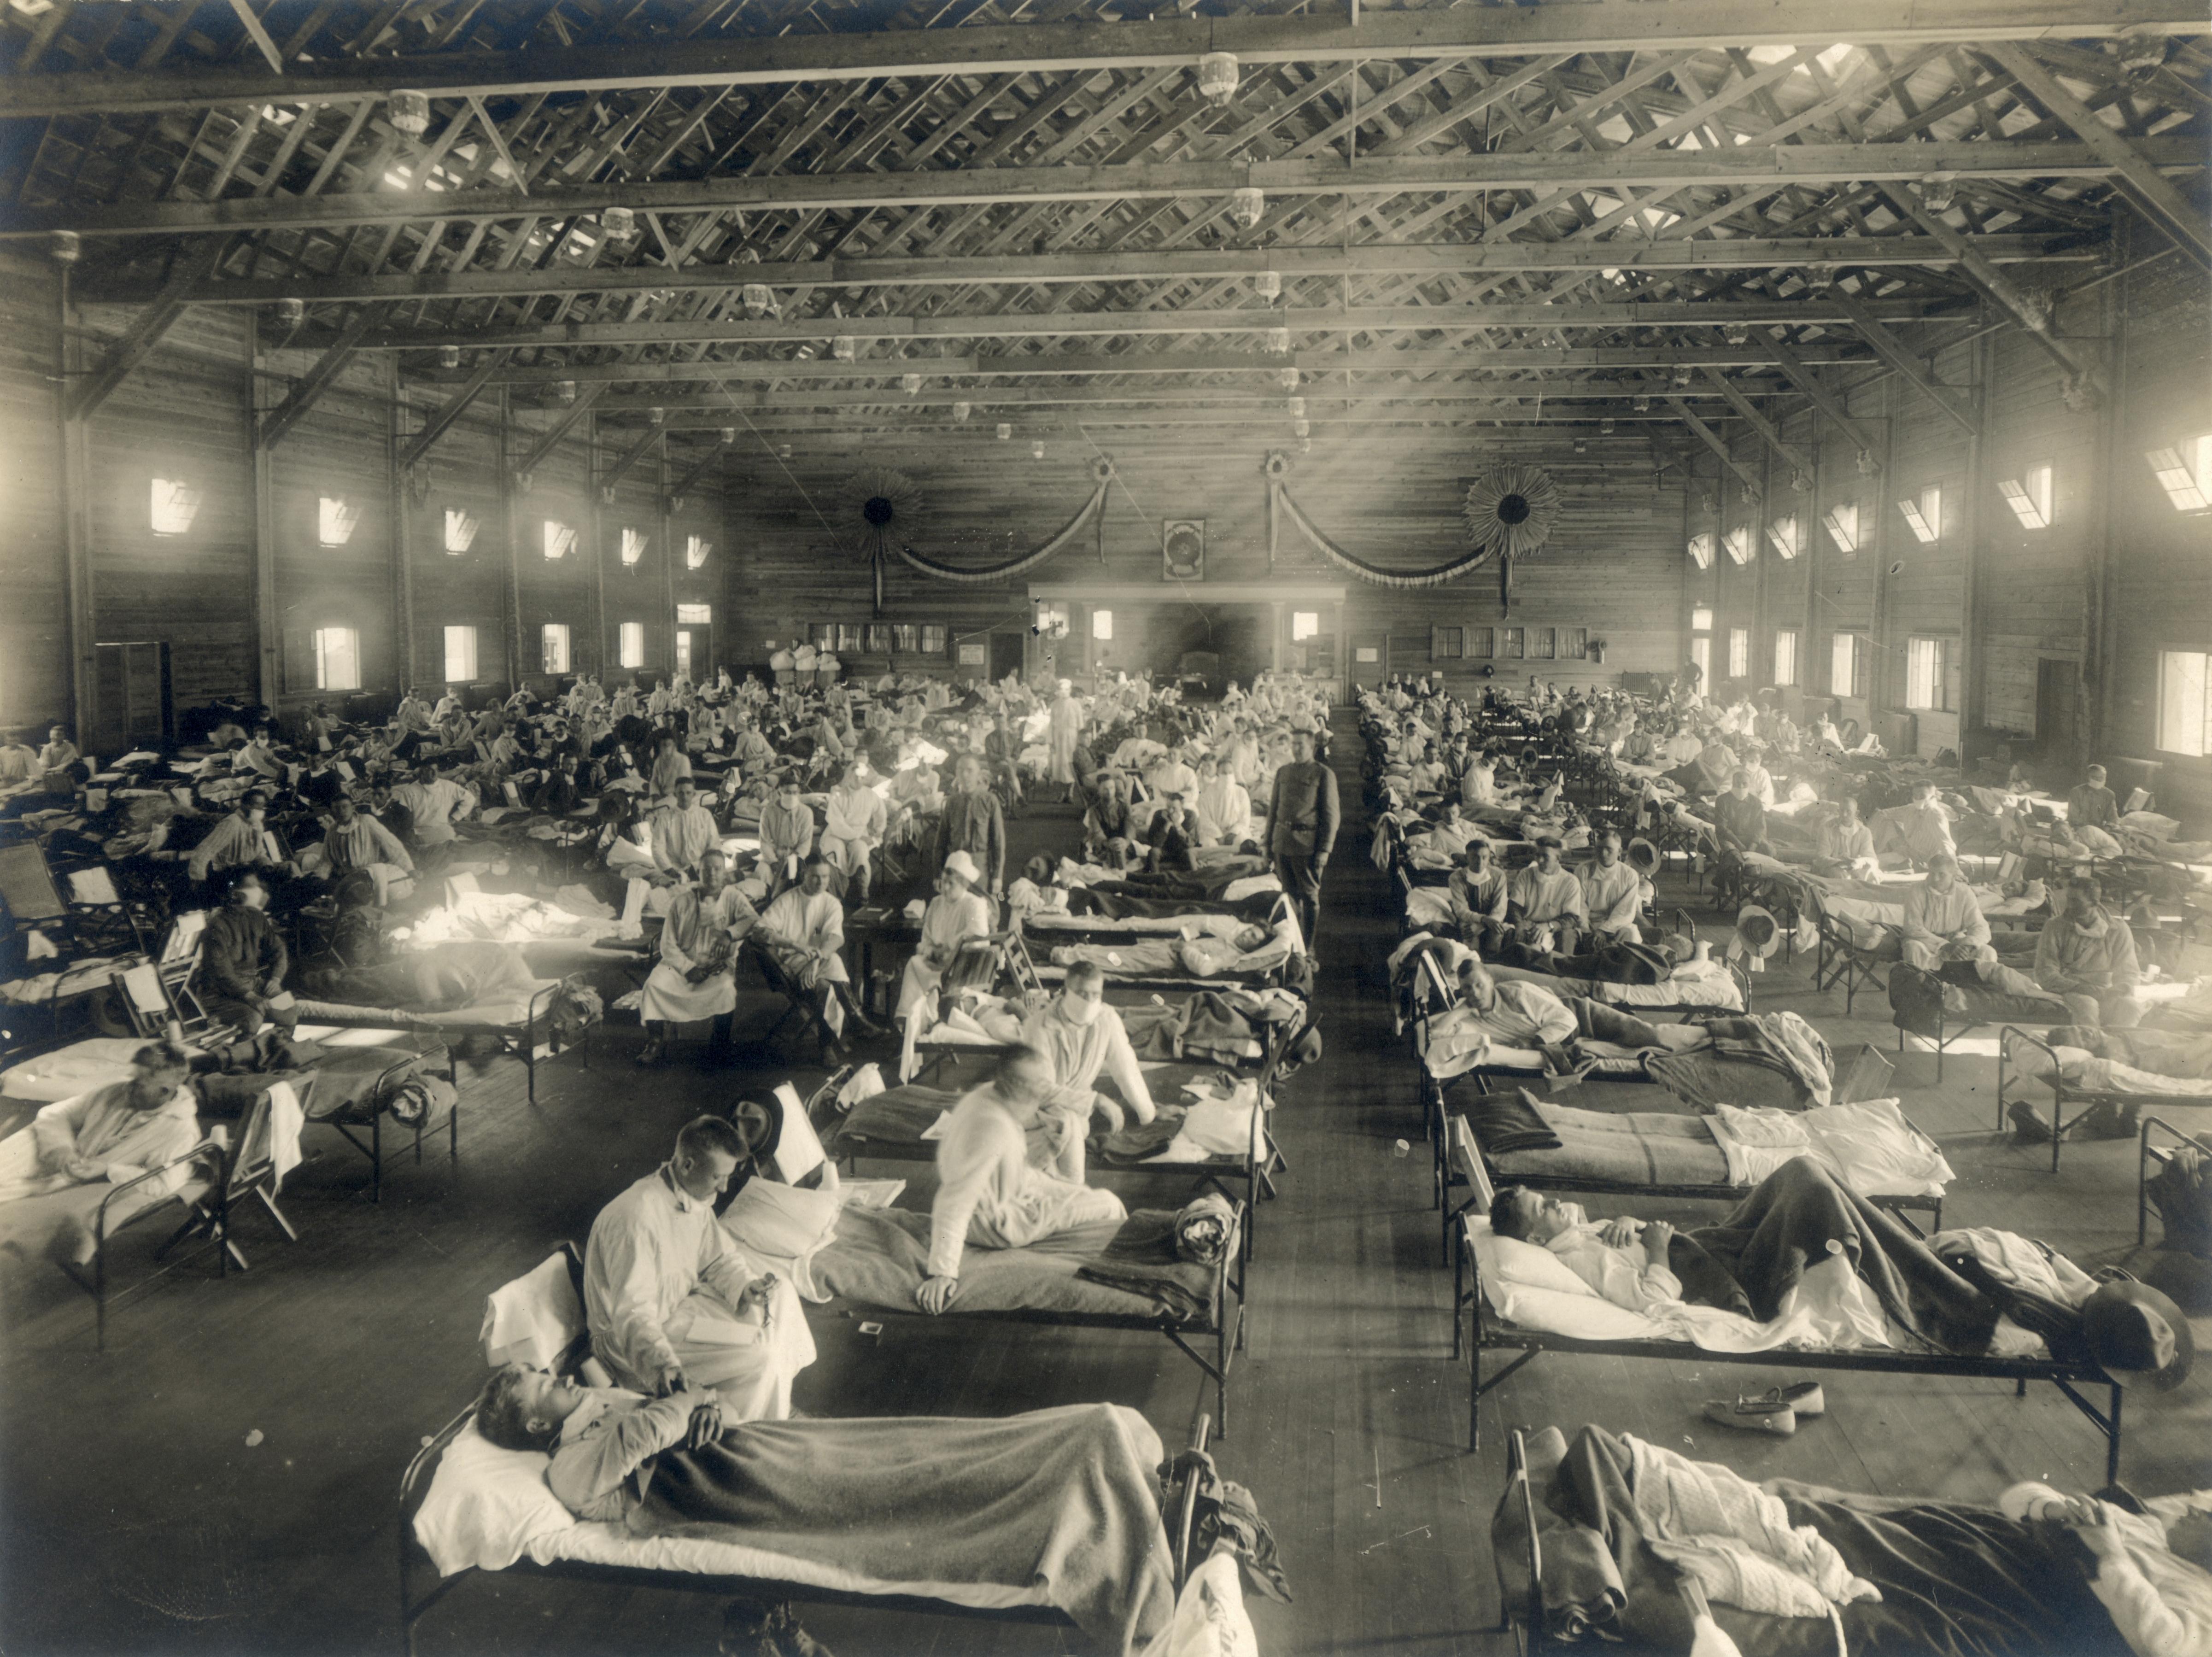 Emergency hospital during 1918 influenza pandemic. Did they have to build back better?